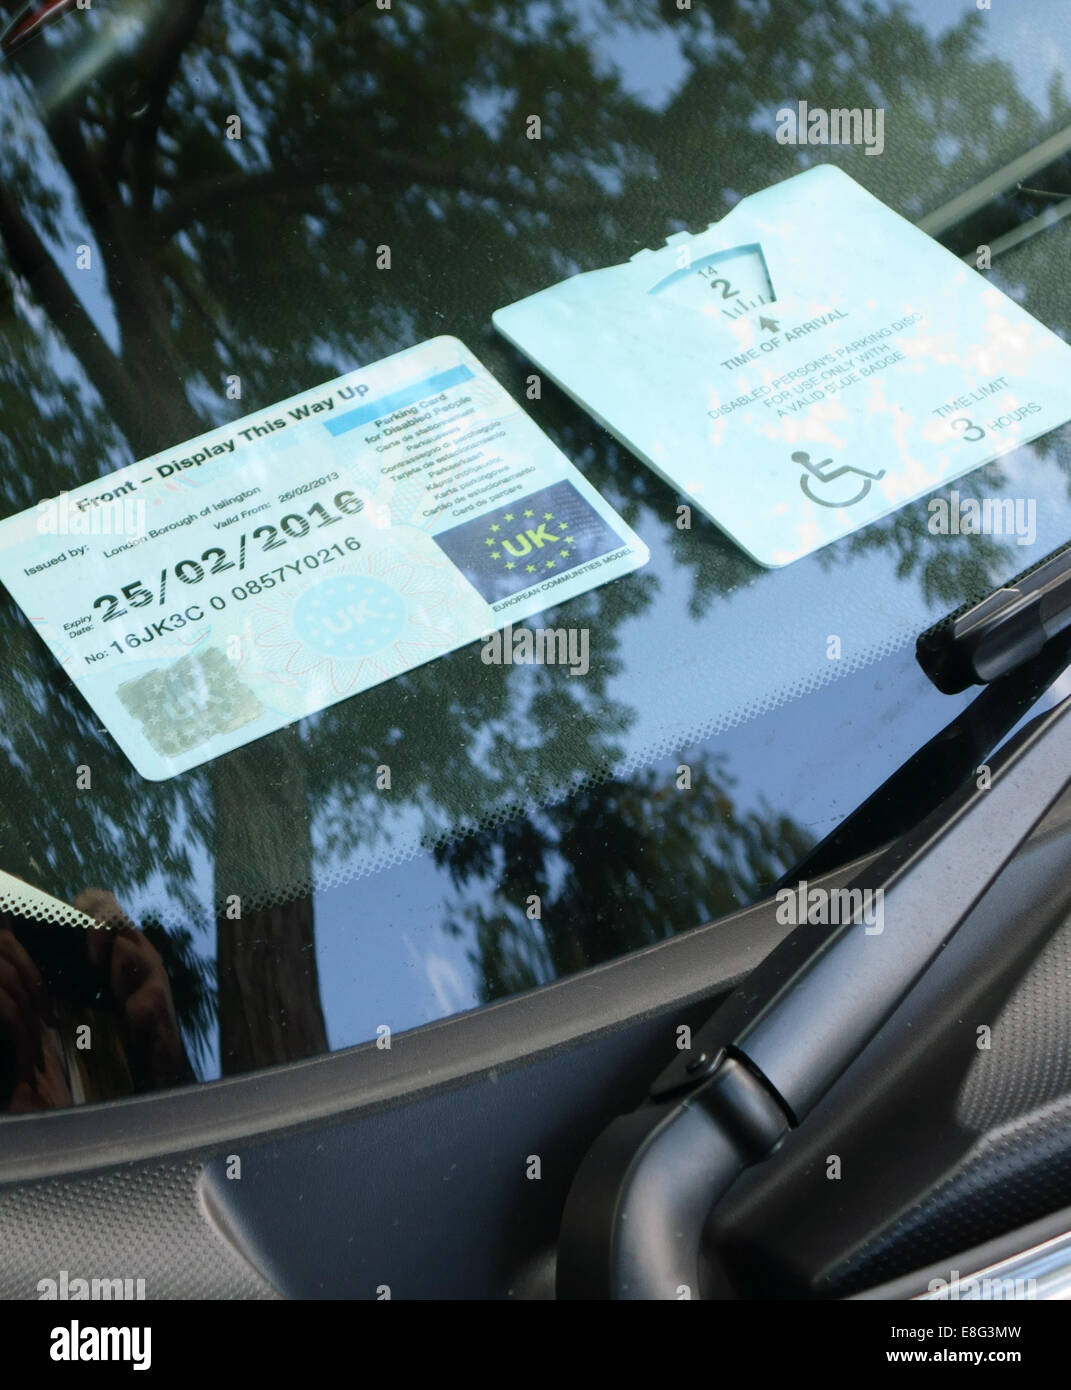 Disabled person parking permit (blue badge) displayed in car in London Stock Photo